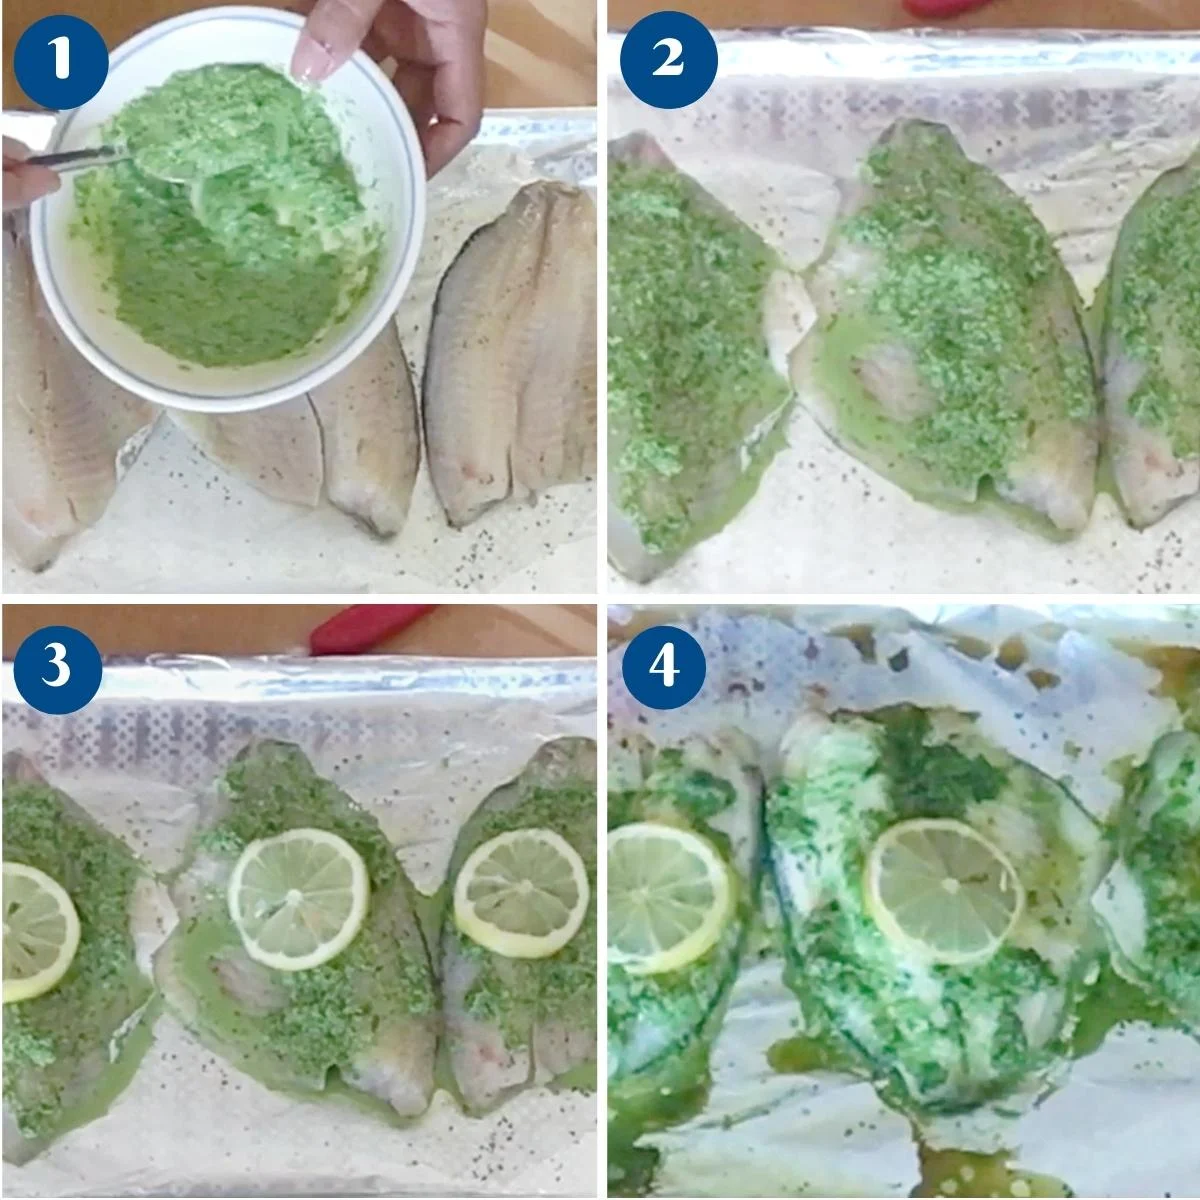 Progress pictures how to bake a fish fillet with cilantro.